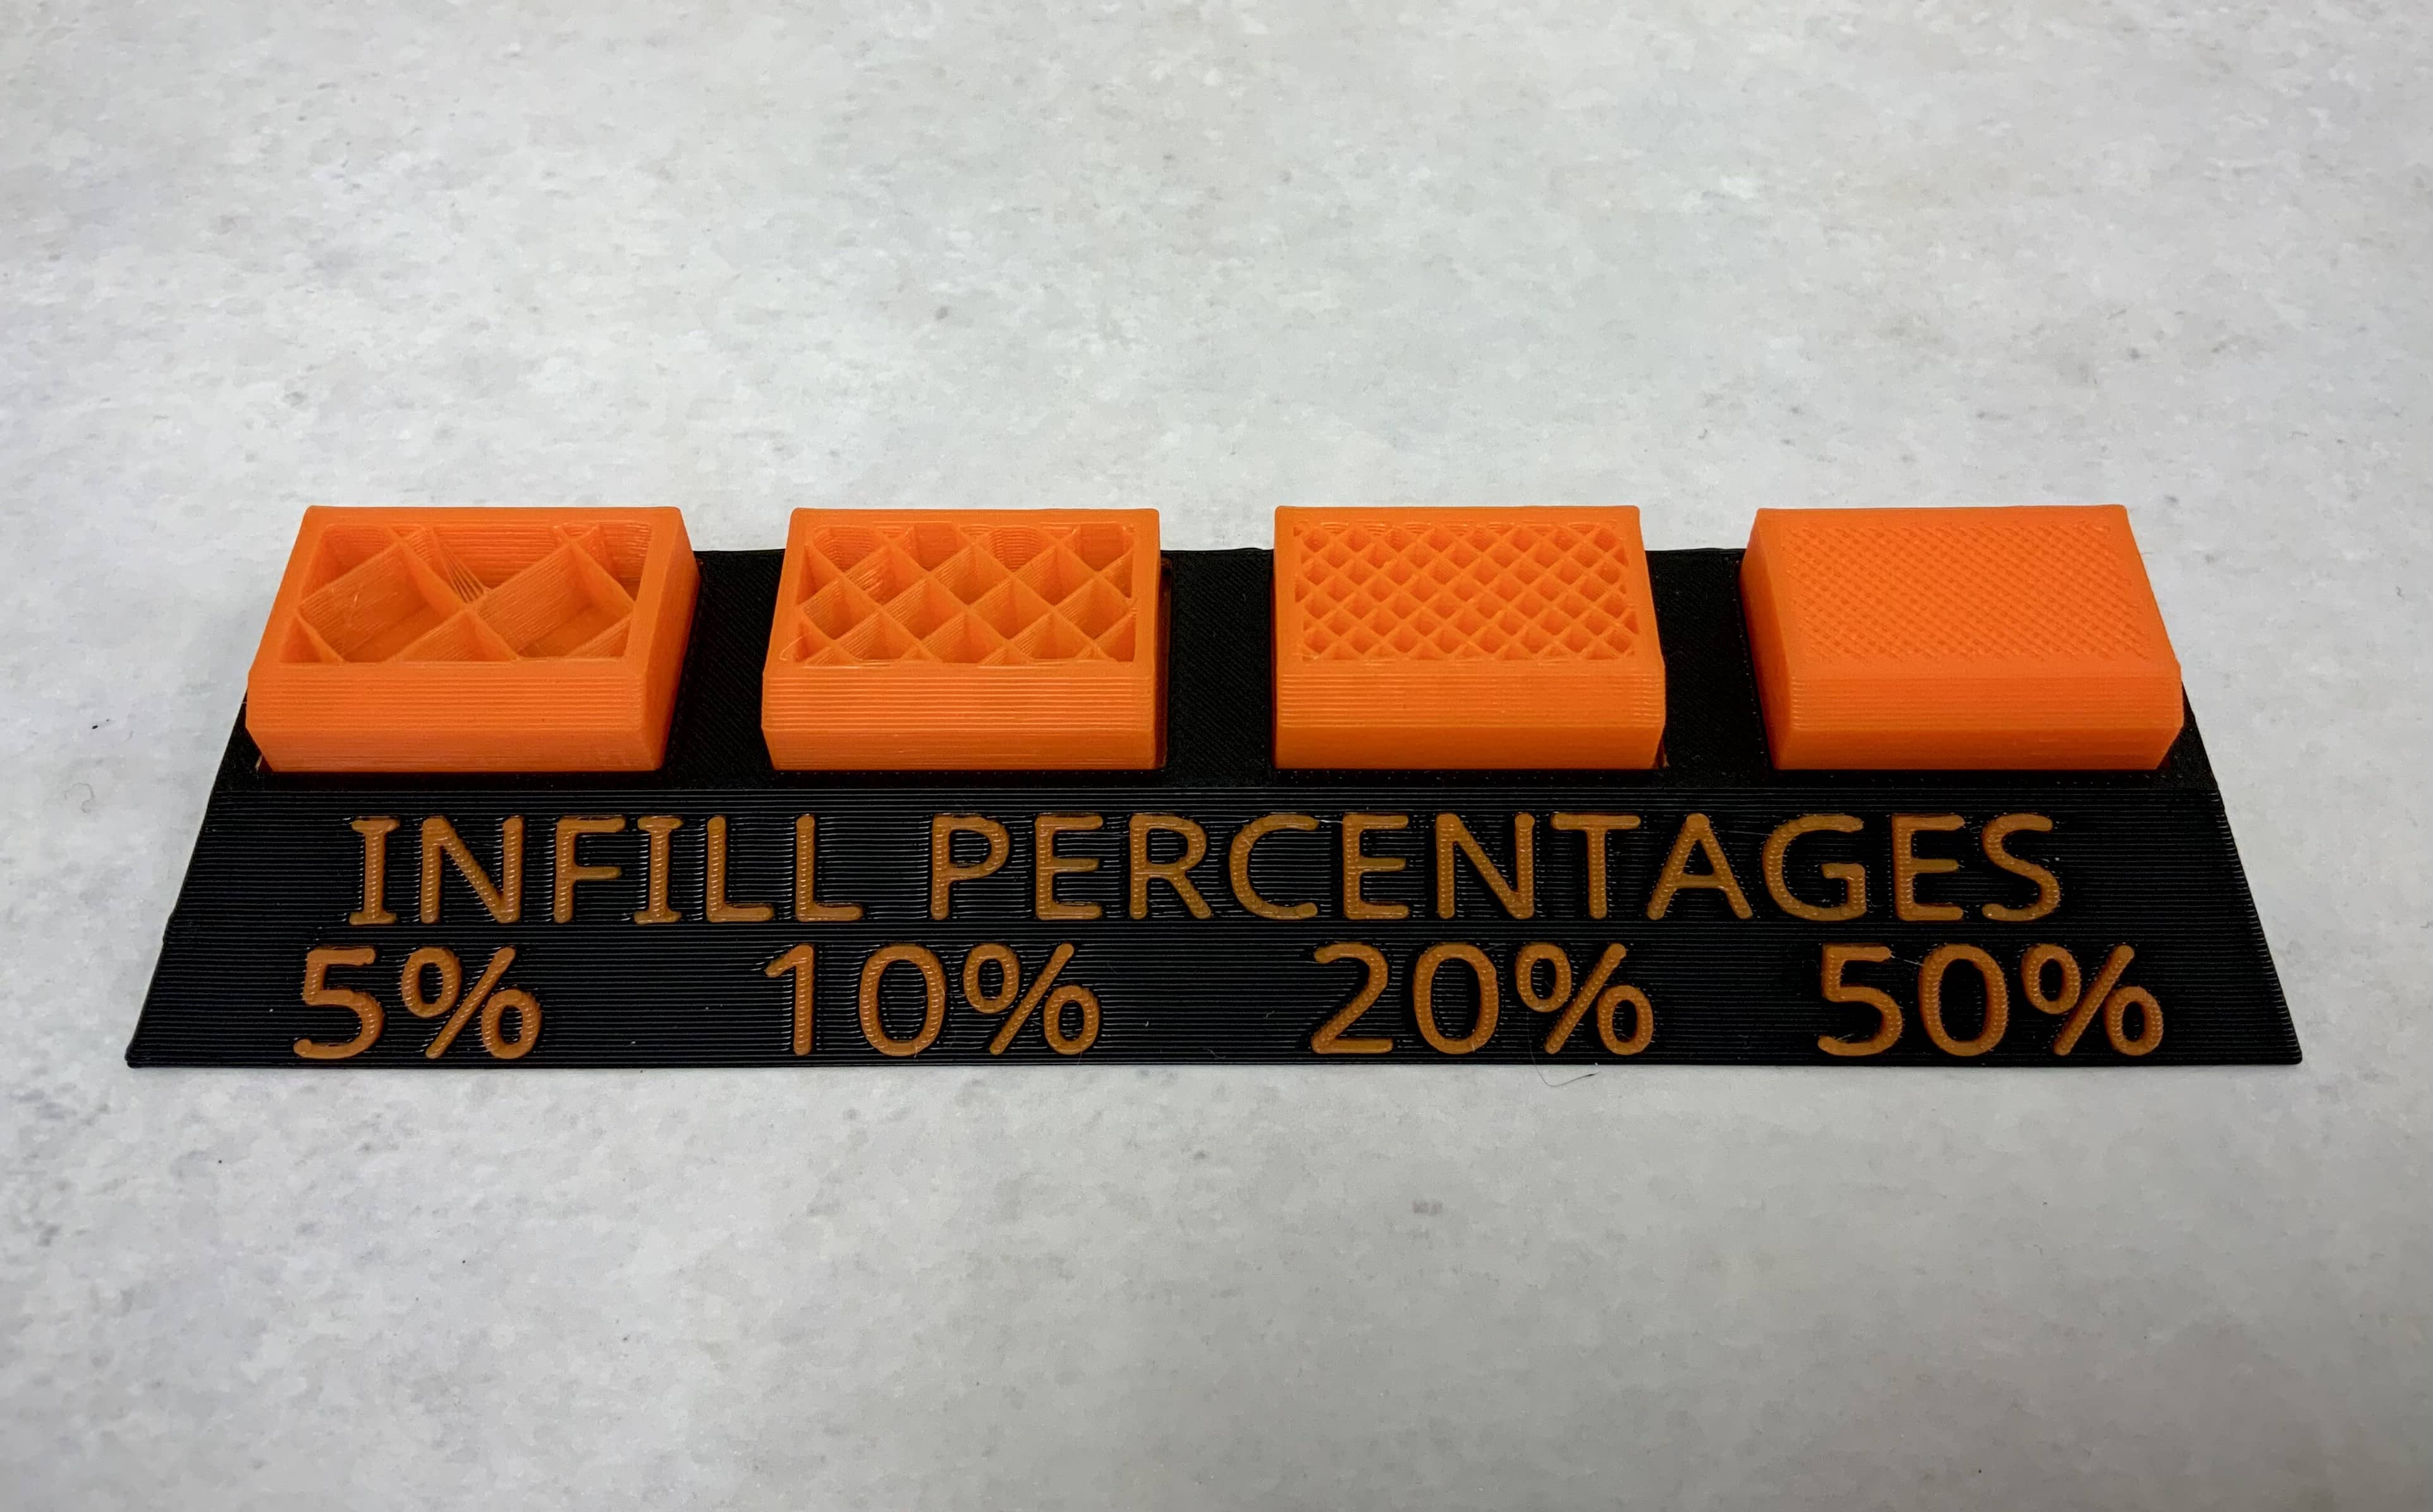 Four orange 3D printed blocks with exposed insides are side by side on a black plinth with orange text which reads "Infill Percentages" and the figures 5%, 10%, 20%, and 50% under each block. Each block has walls in a diagonal grid formation inside with different spacing. The left block has large squares of space, with each subsequent block showing progressively less negative space, until the right block whose squares are barely visible.